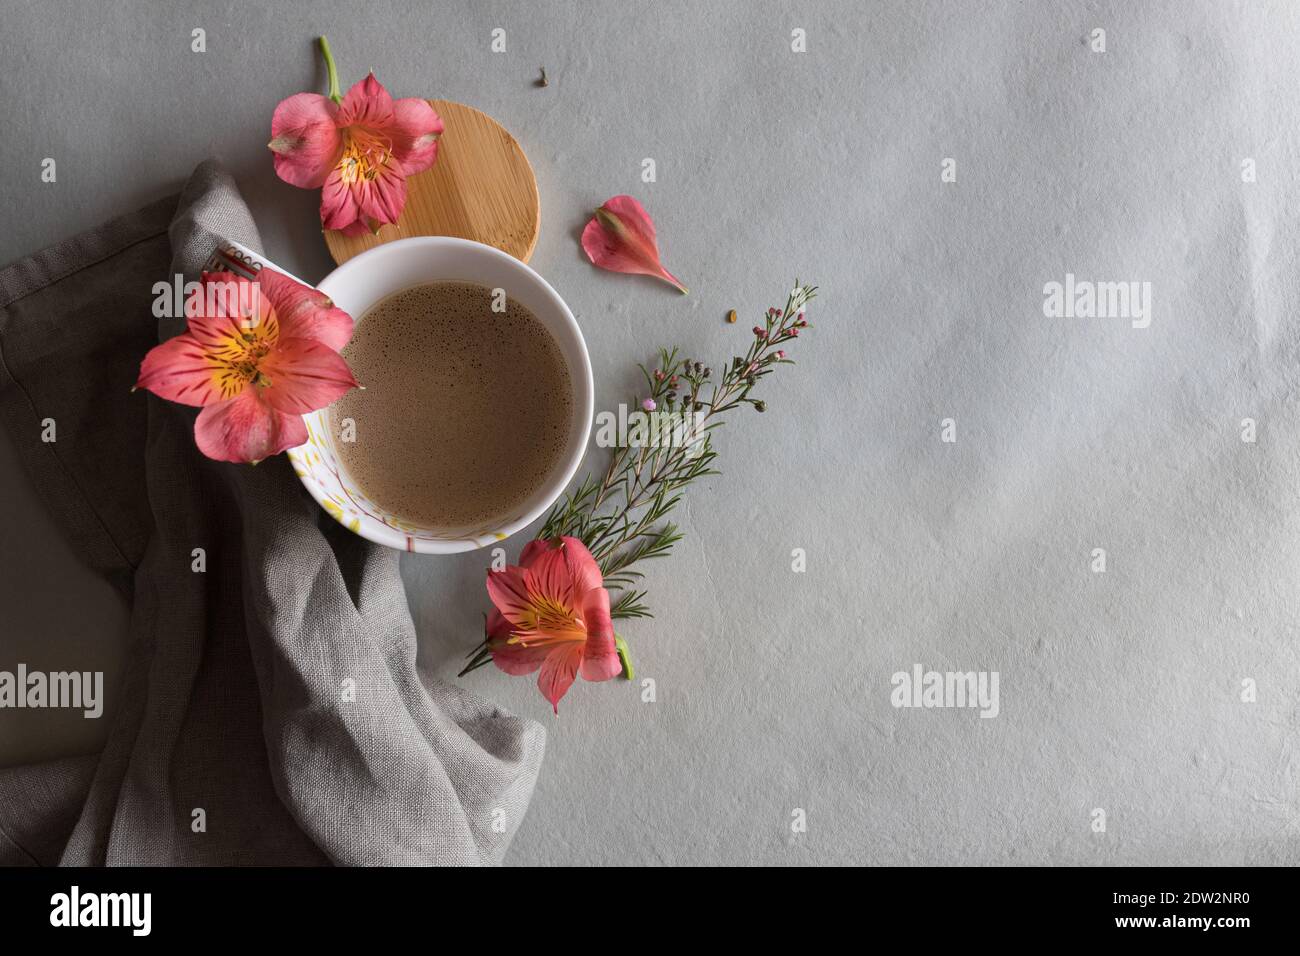 Overhead view of a cup of a foamy coffee with a beautiful red pink flower at the top and some additional flowers around it. Stock Photo